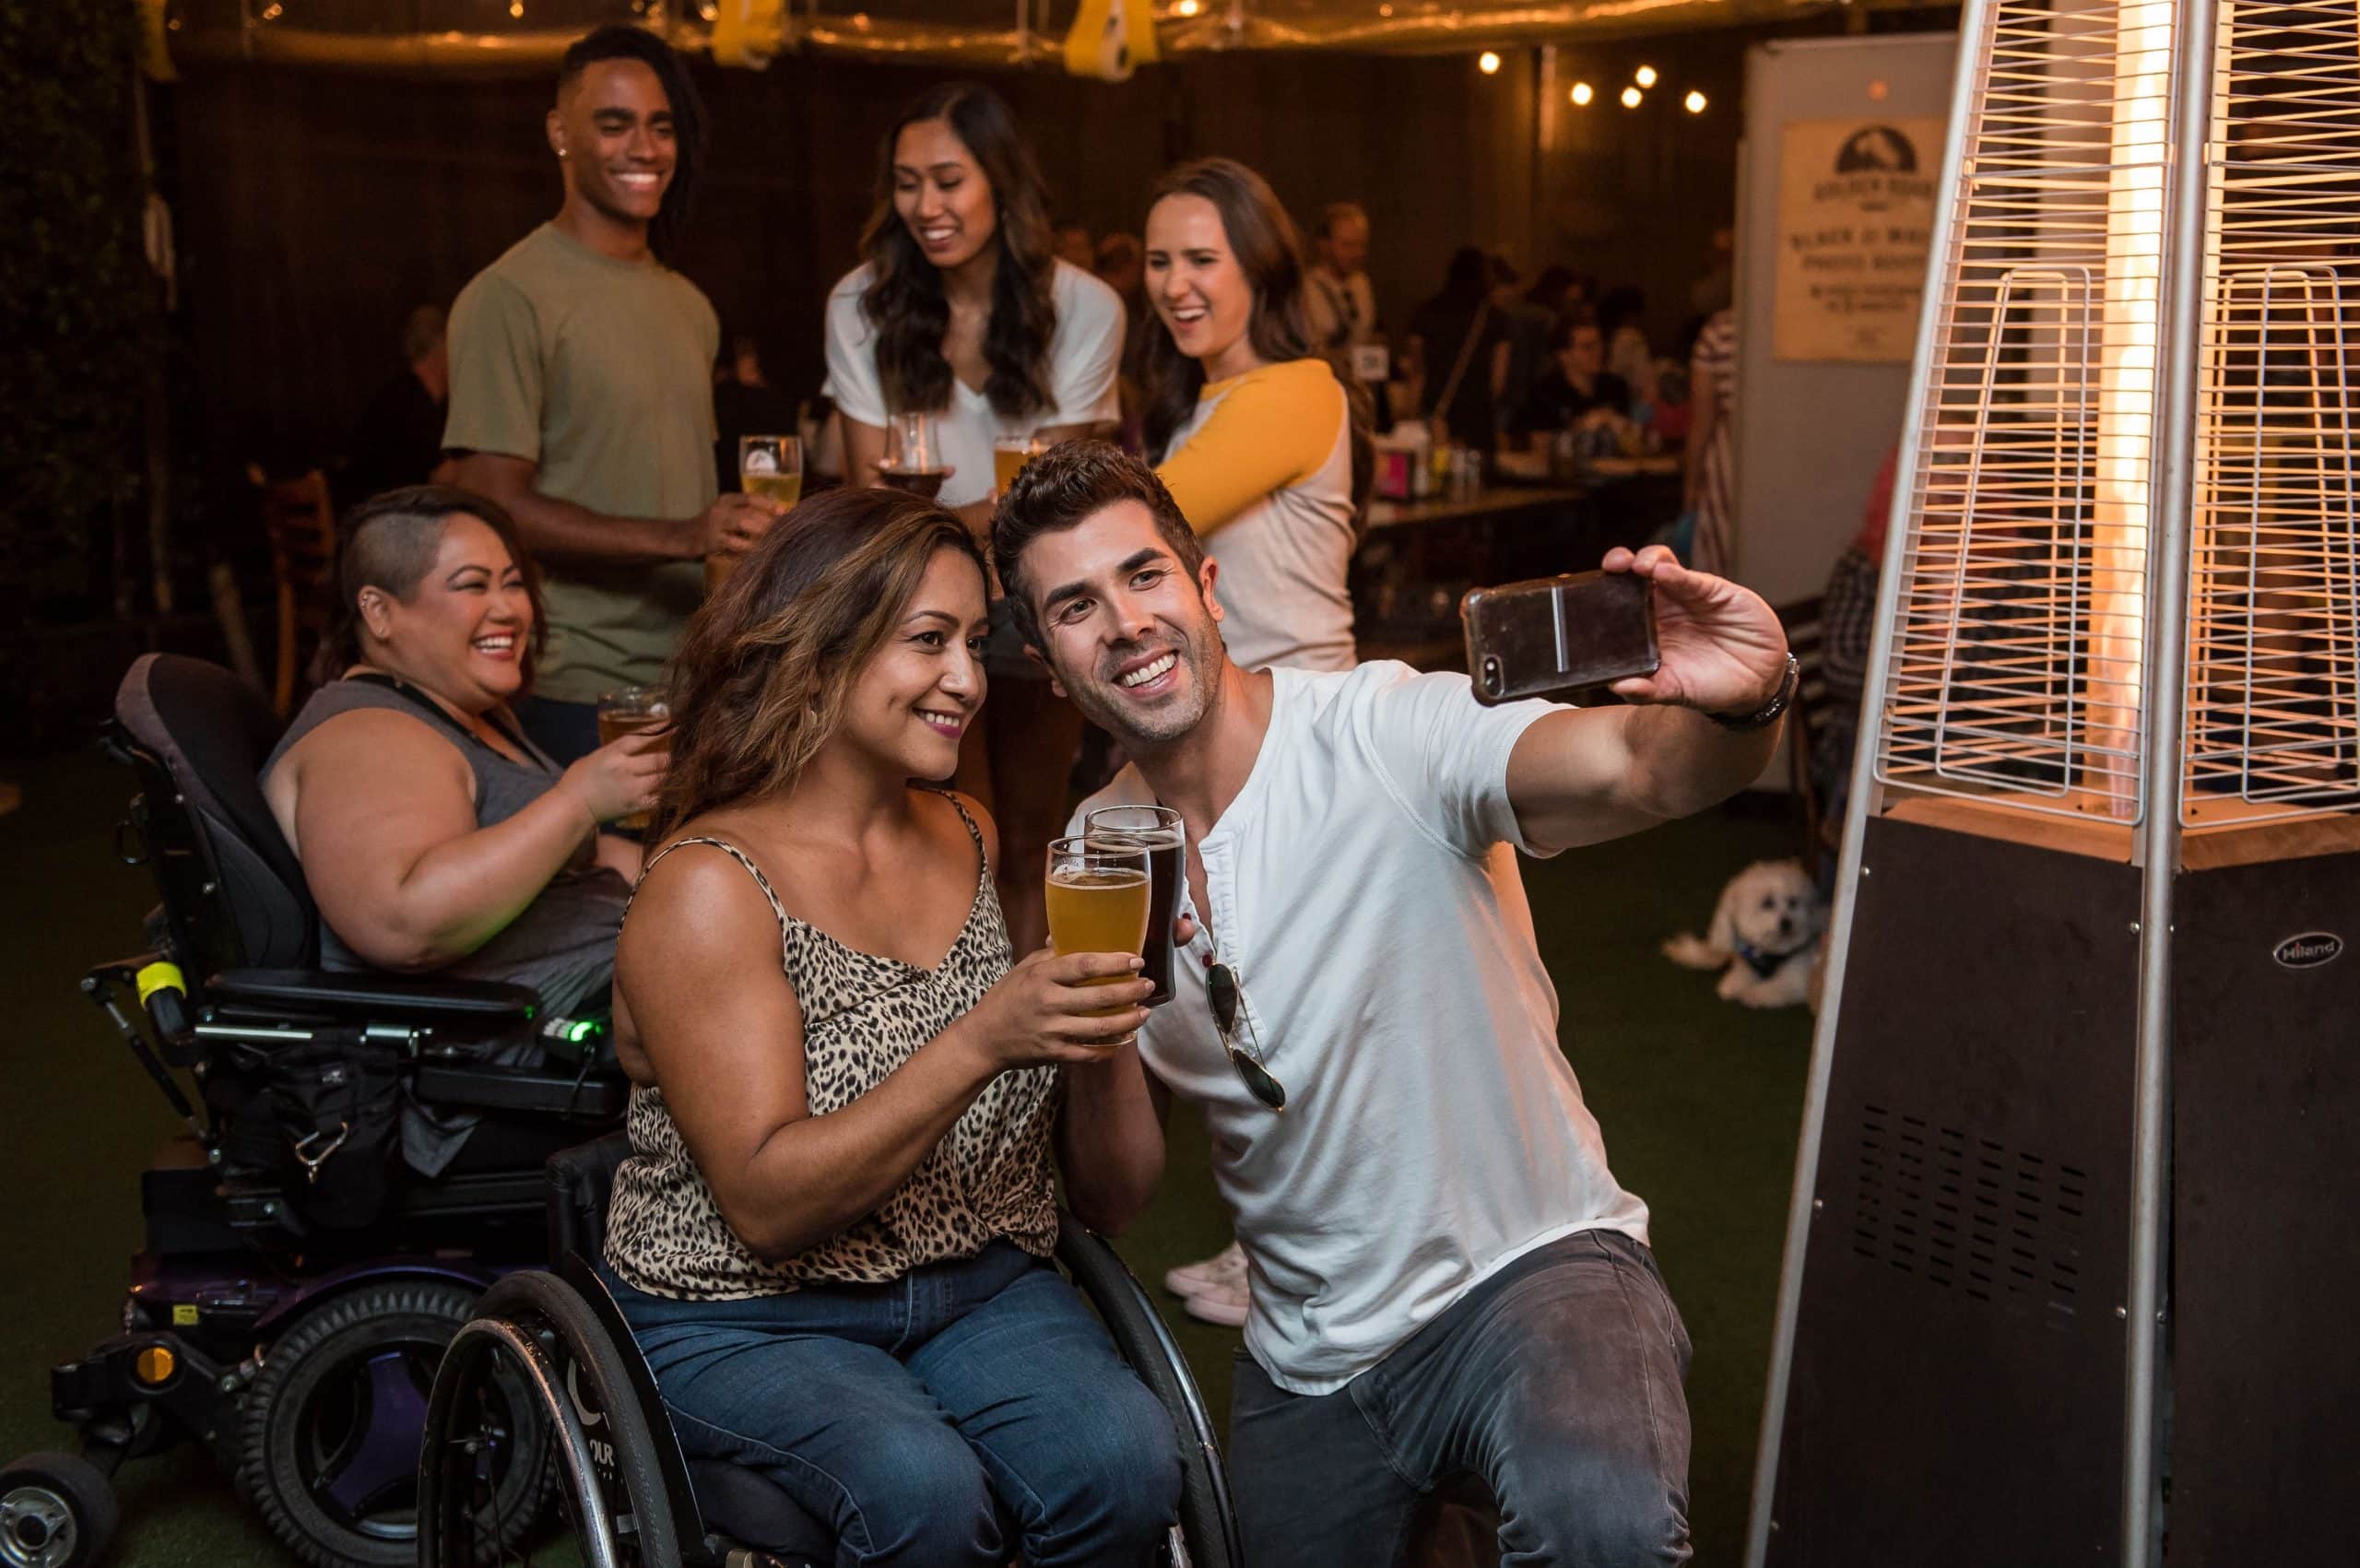 Friend group takes a selfie while holding beers, two of the friends are in wheelchairs